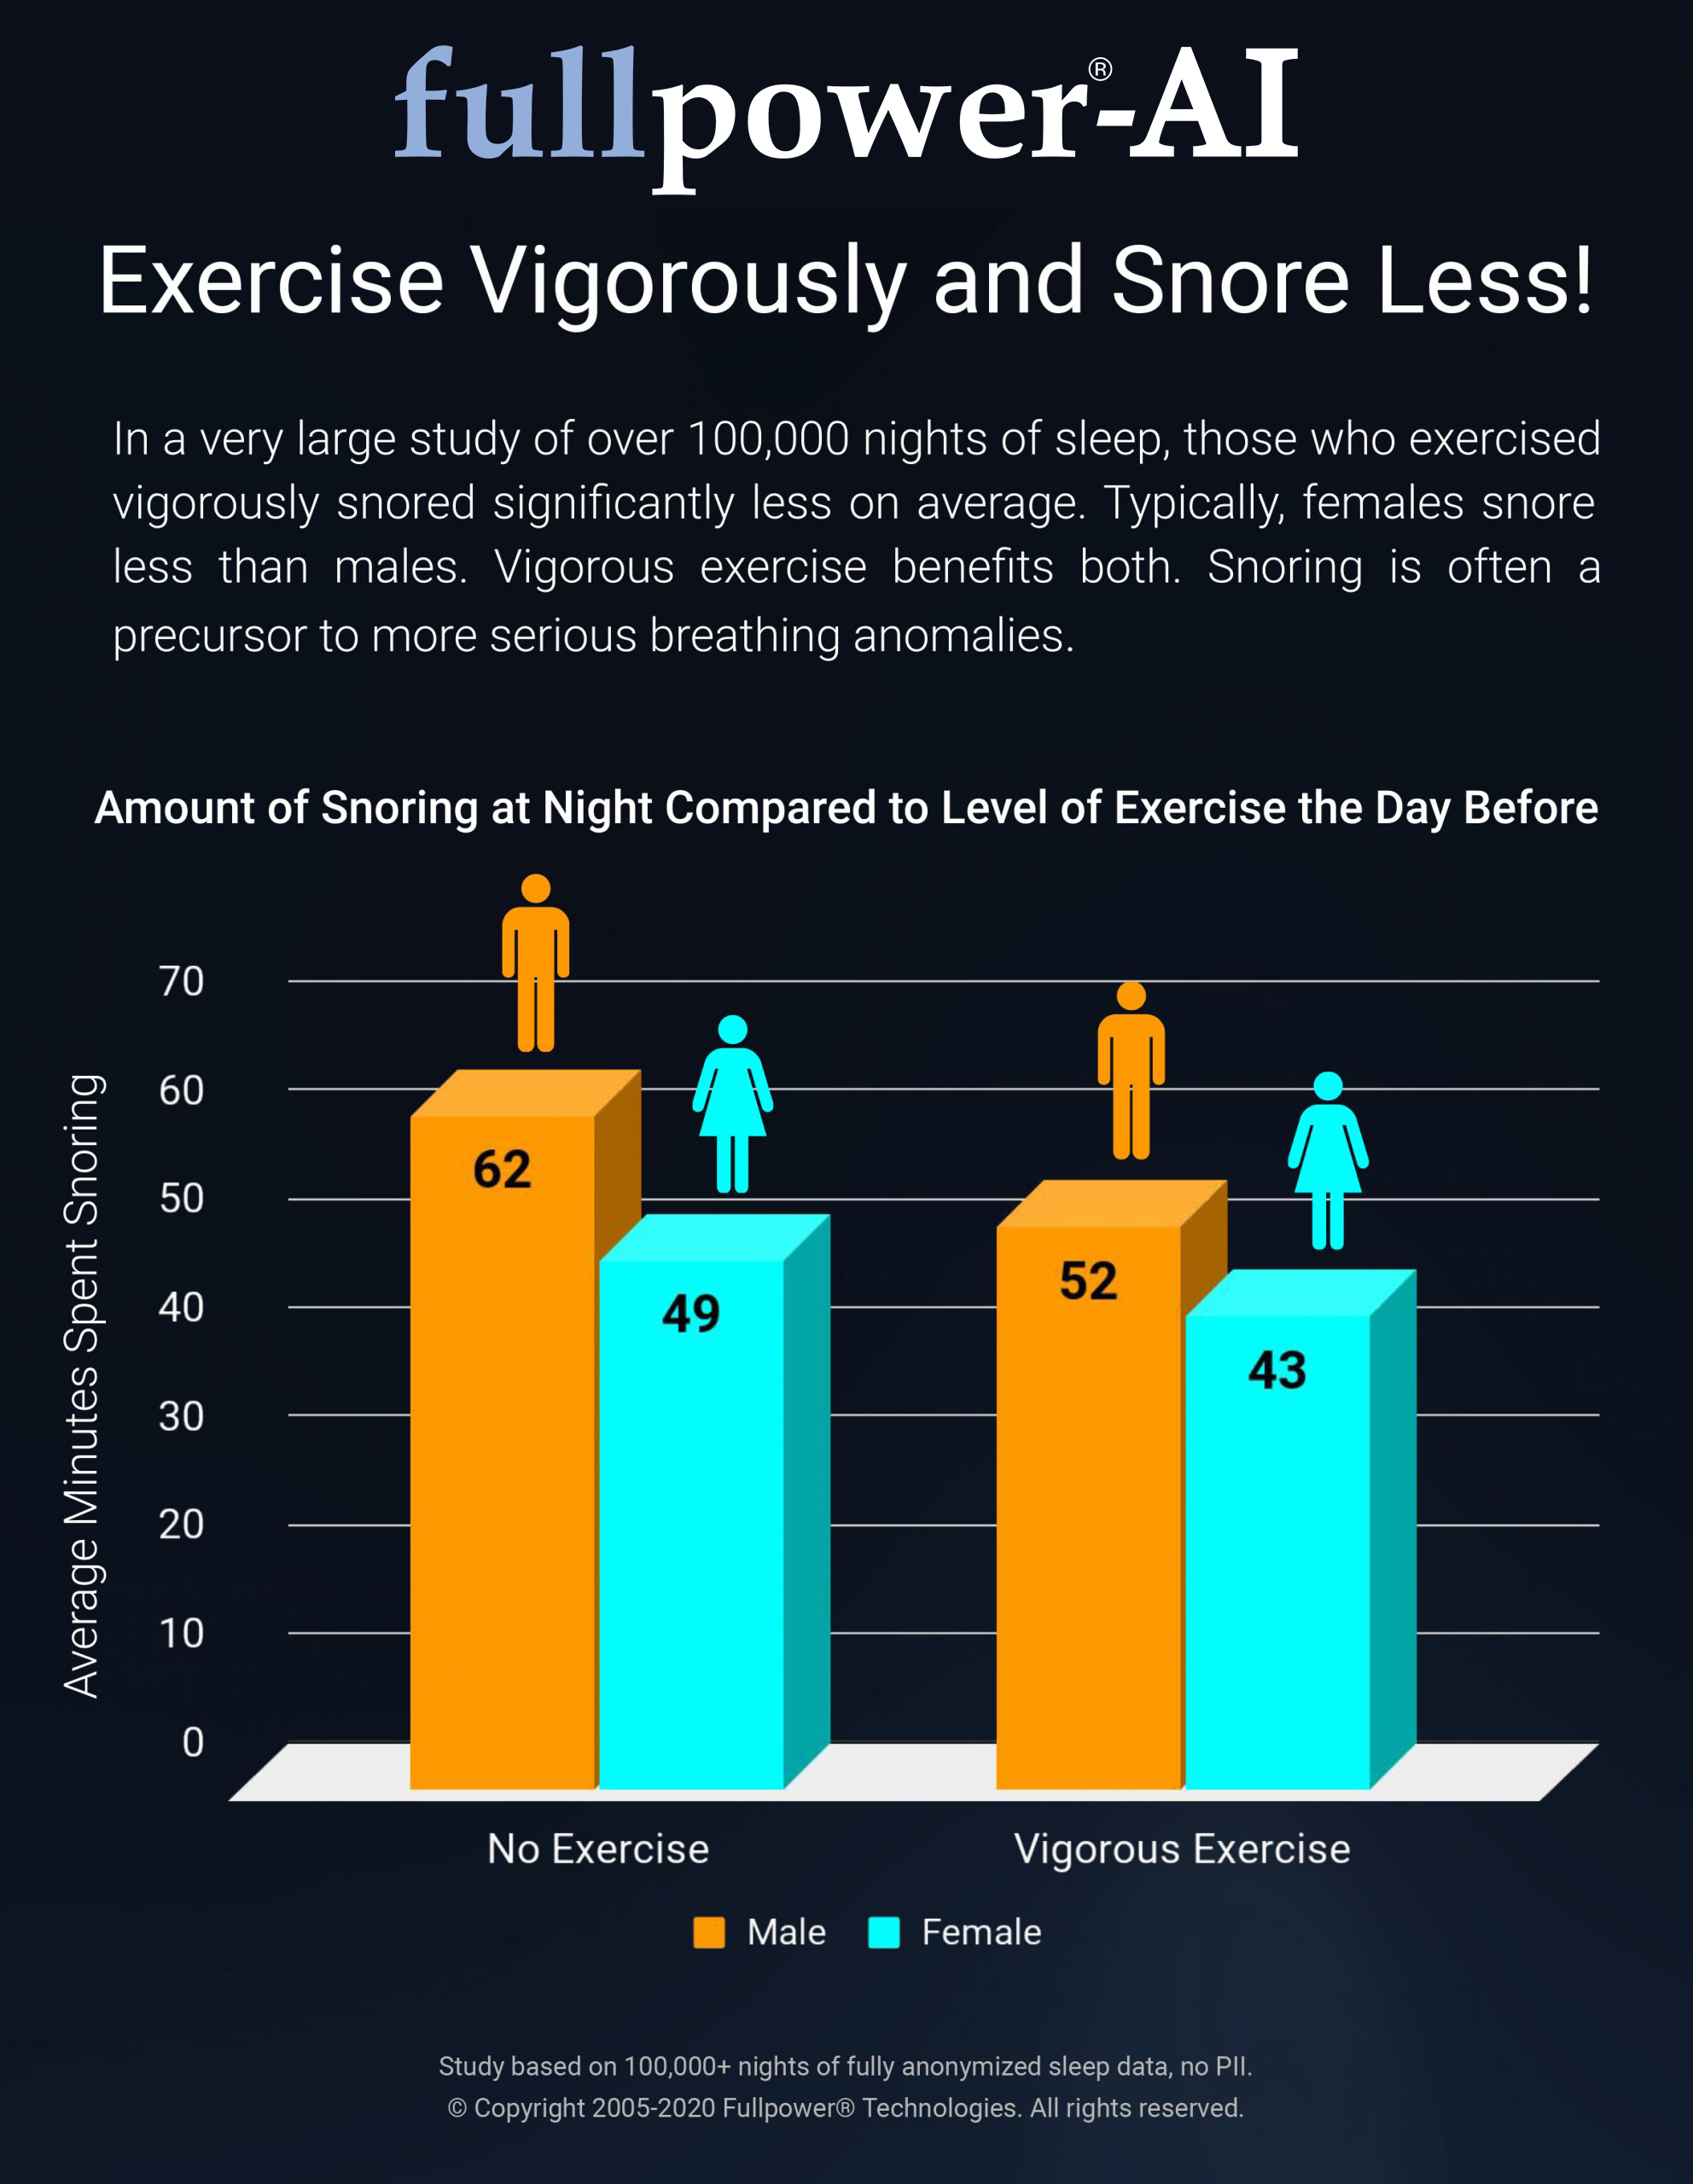 Exercise Vigorously and Snore Less